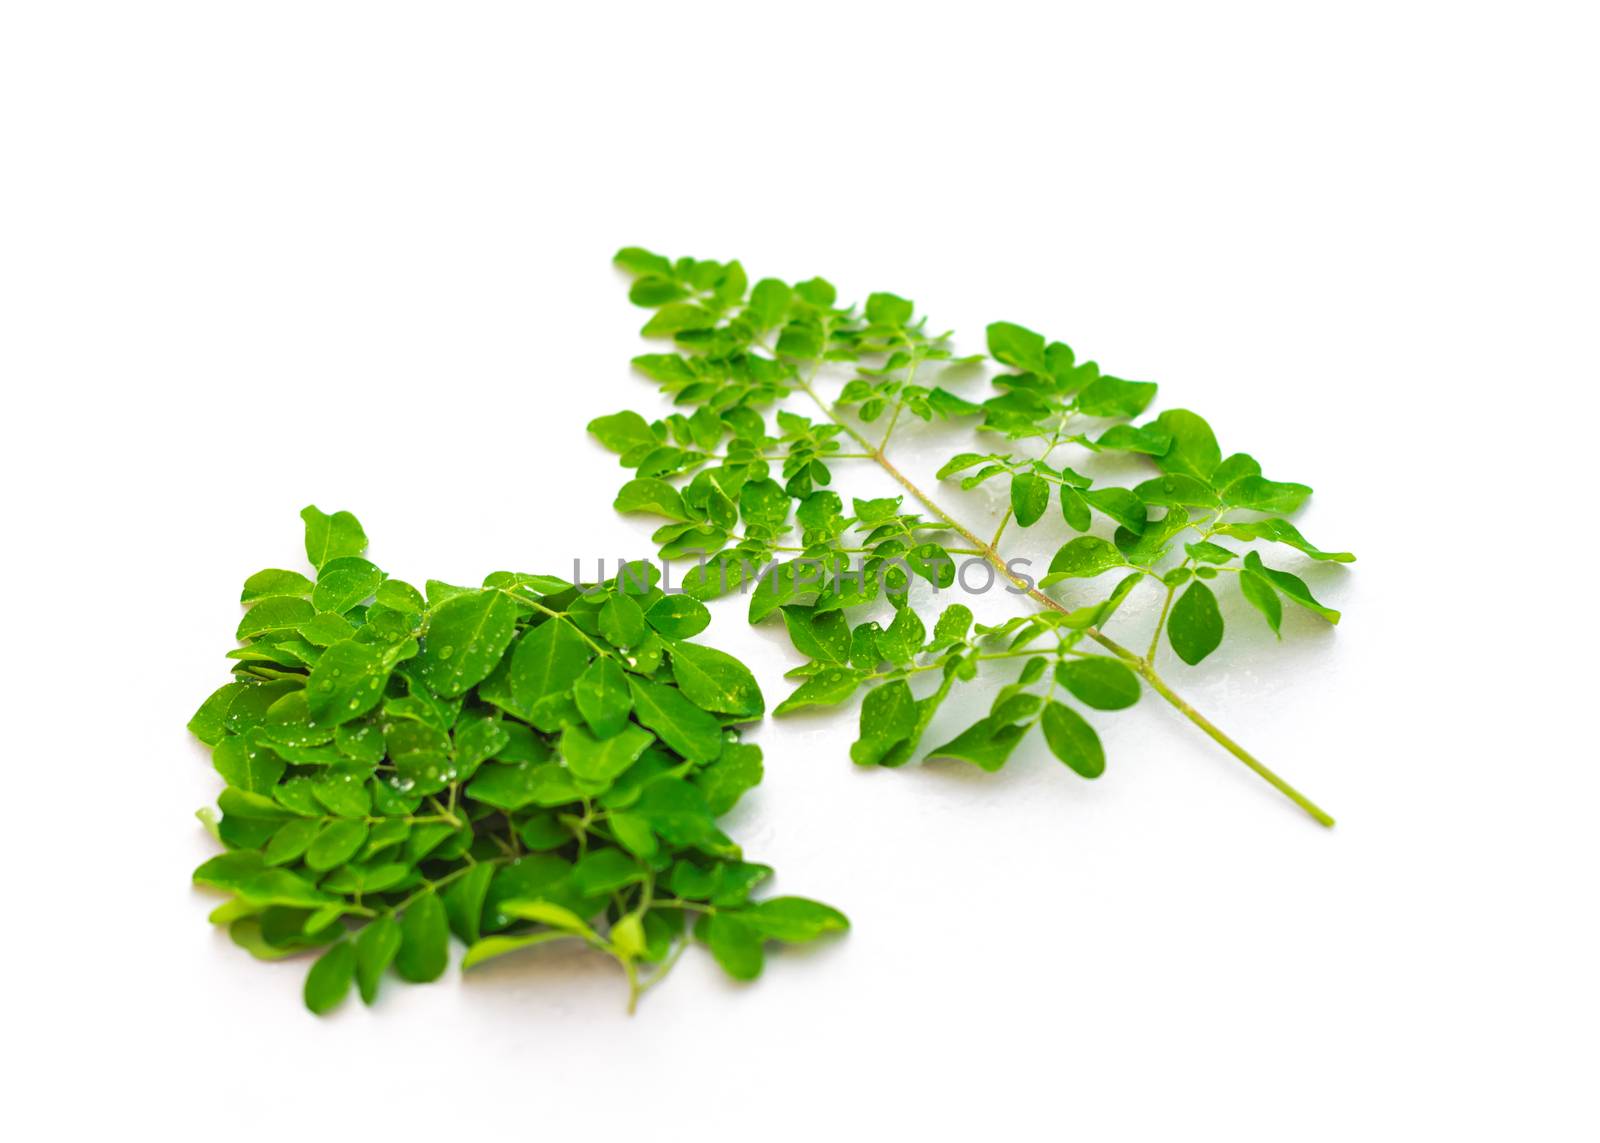 Organic Moringa oleifera leaves with water drops isolated on white background. Common names include drumstick, Malunggay, horseradish or benzolive tree